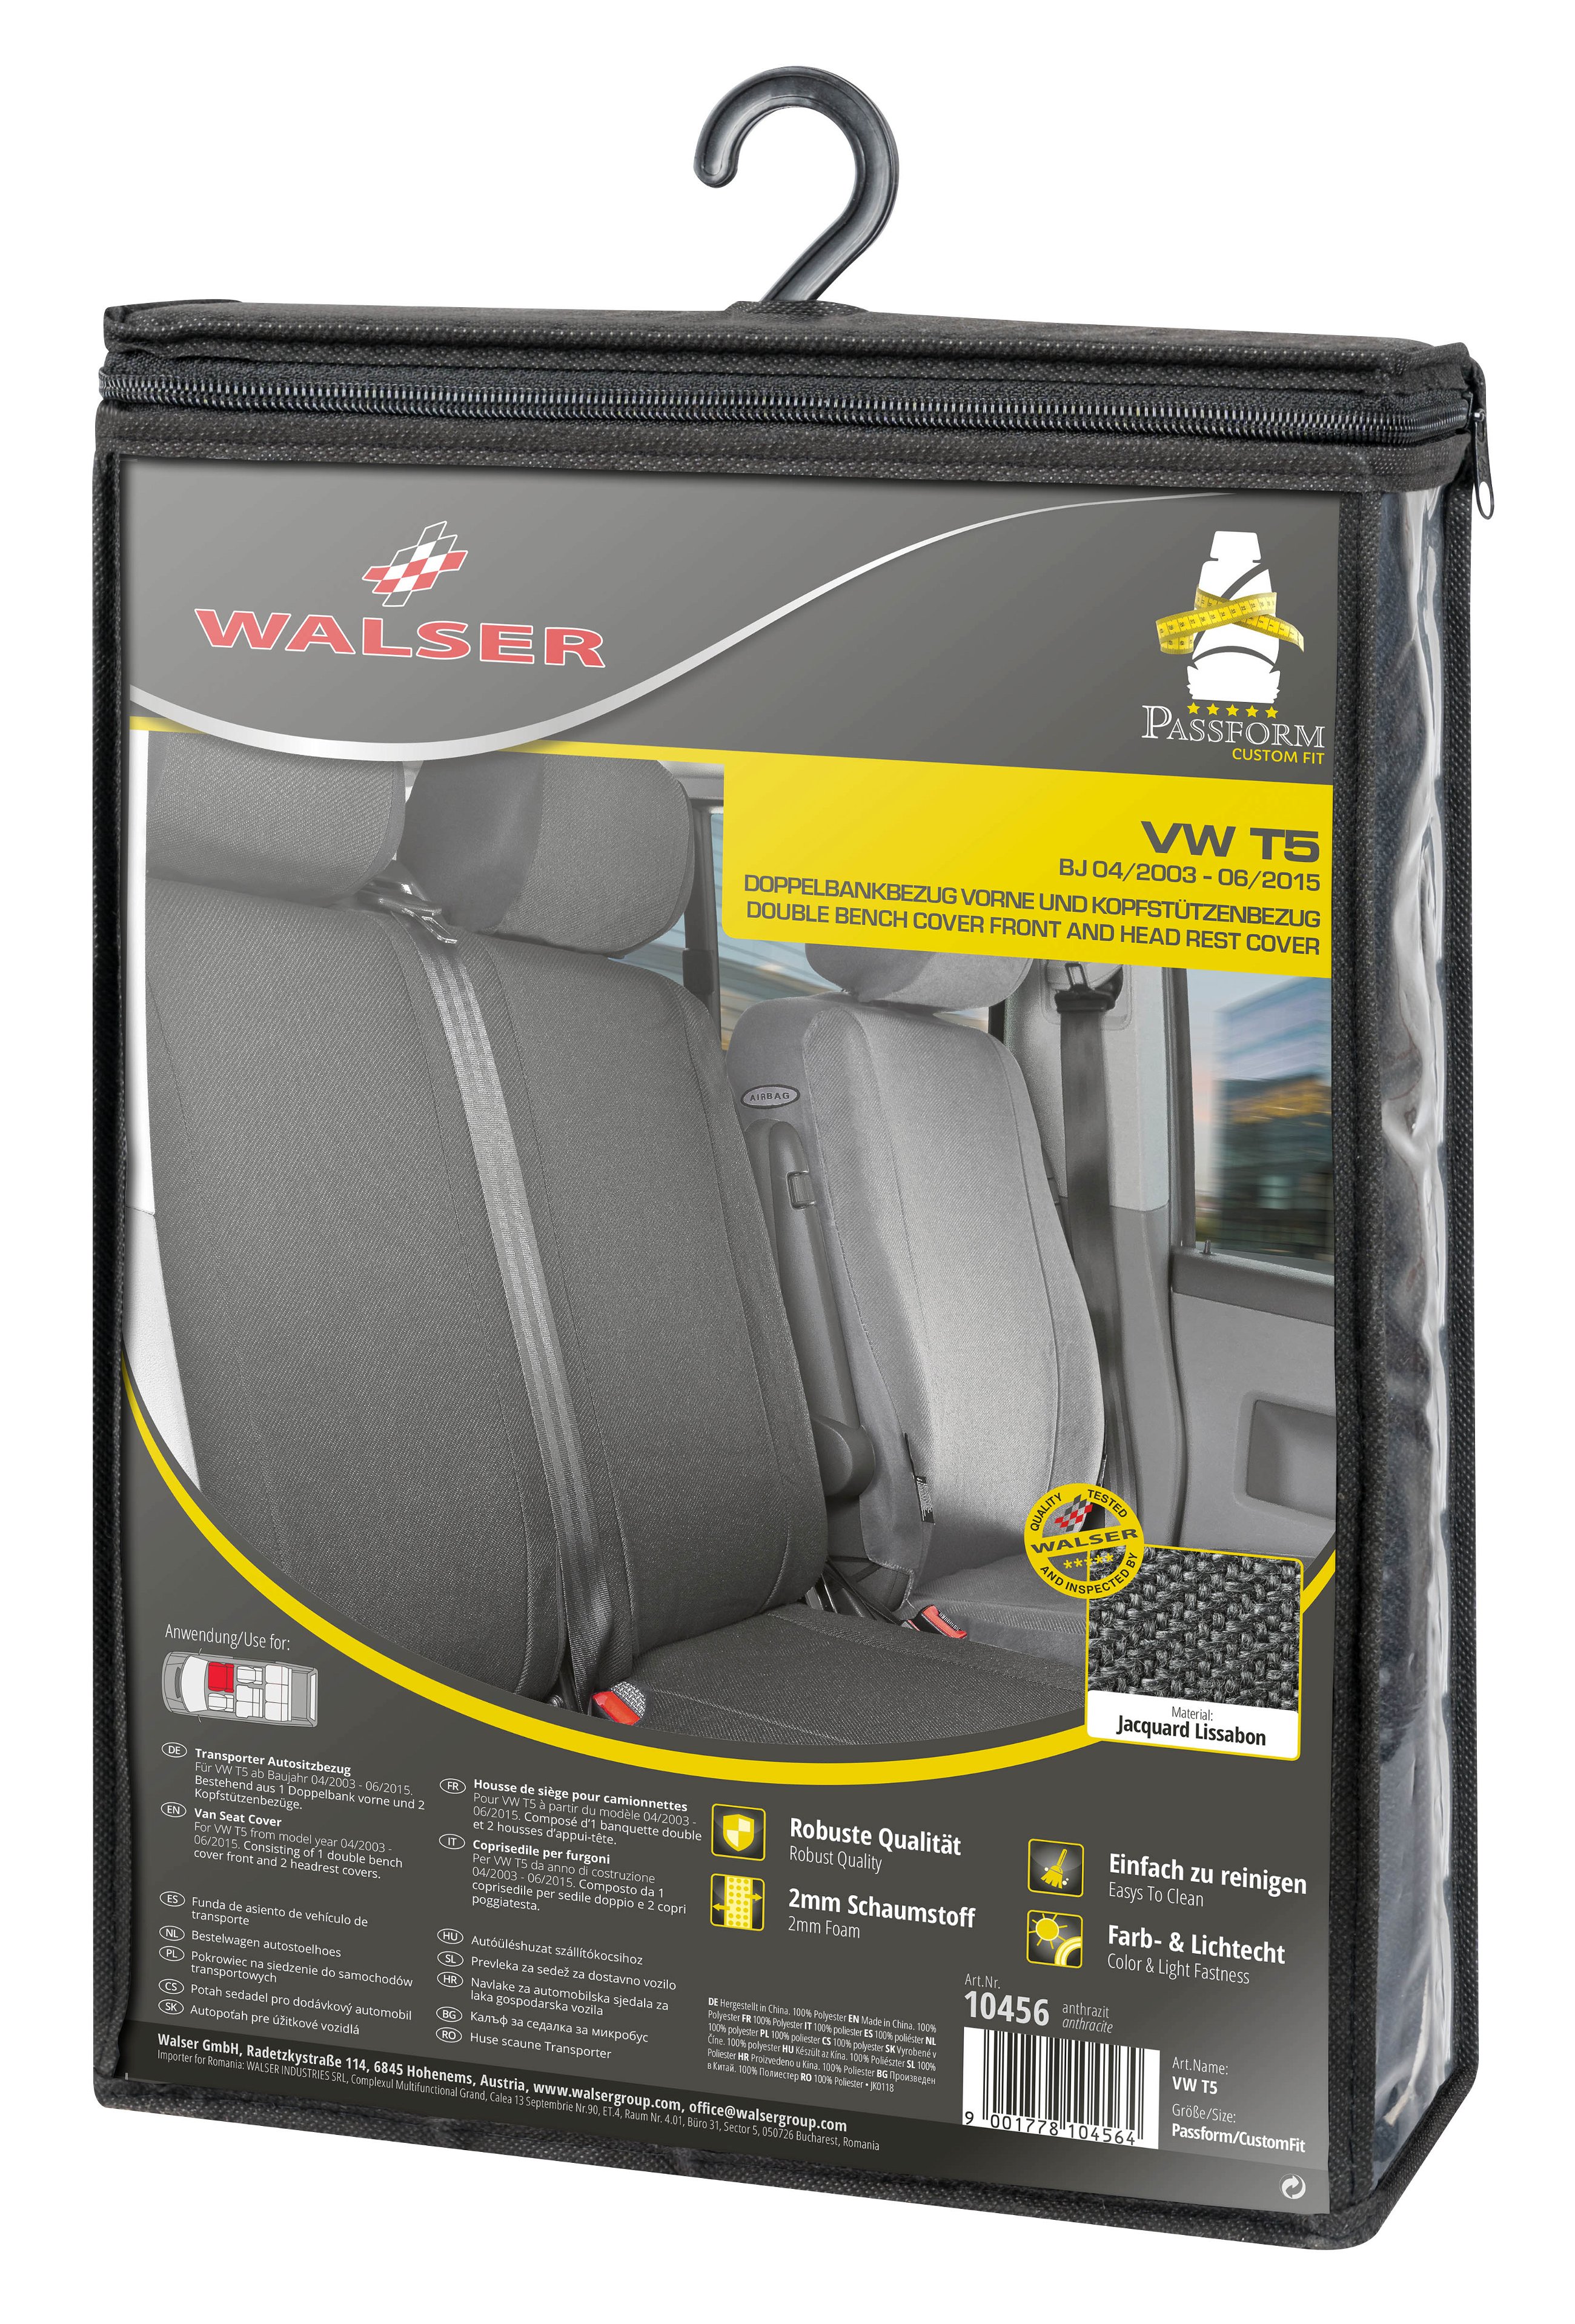 Car Seat cover Transporter made of fabric for VW T5, double bench front